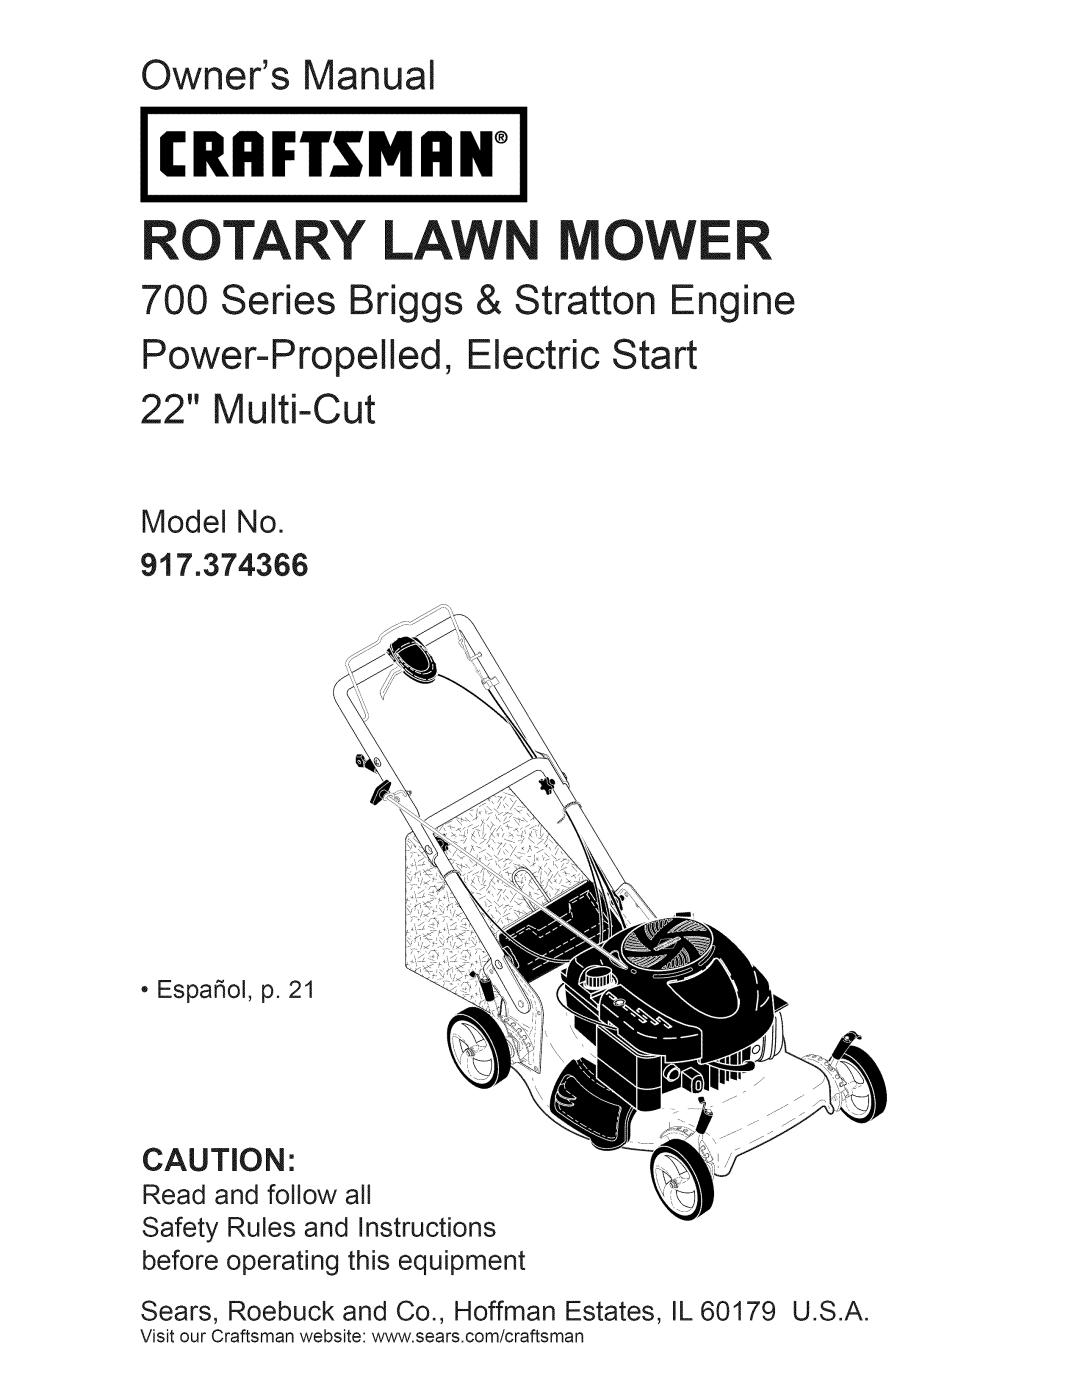 Craftsman 700 Series owner manual Model No, Craftsman, Rotary Lawn Mower, Owners Manual, Series Briggs & Stratton Engine 